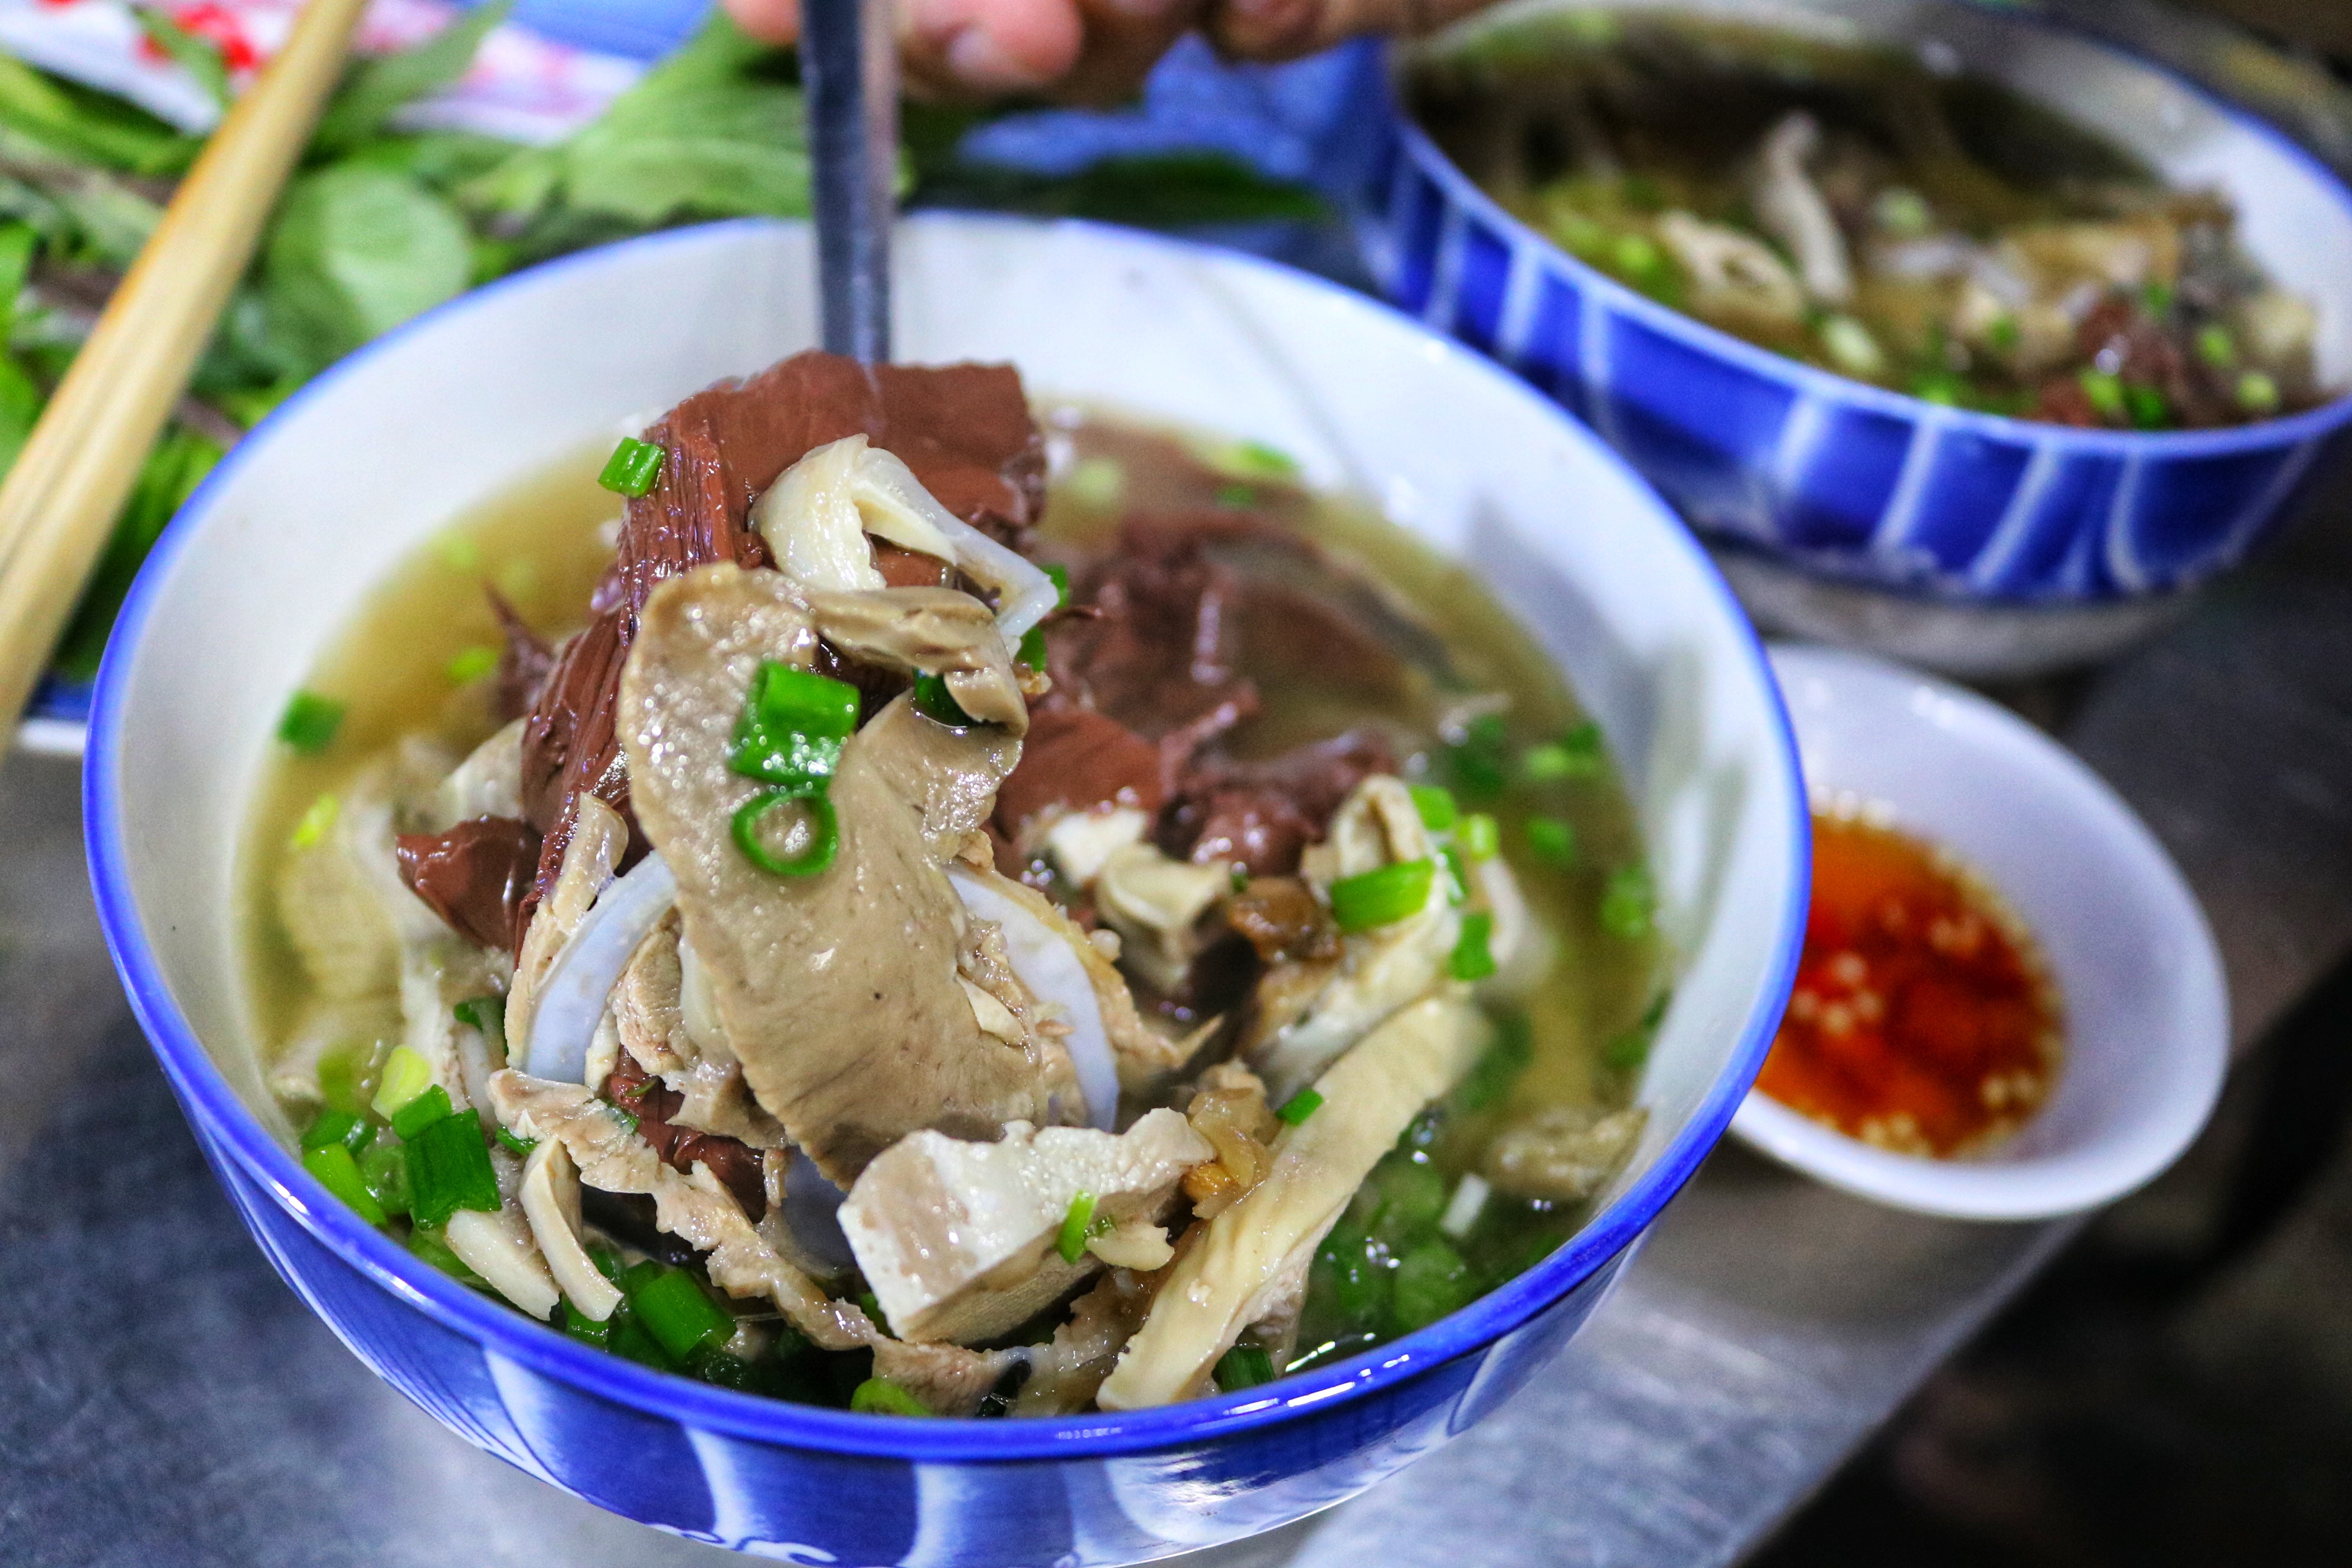 Ho Chi Minh City stall sells blood pudding topped with pig organs